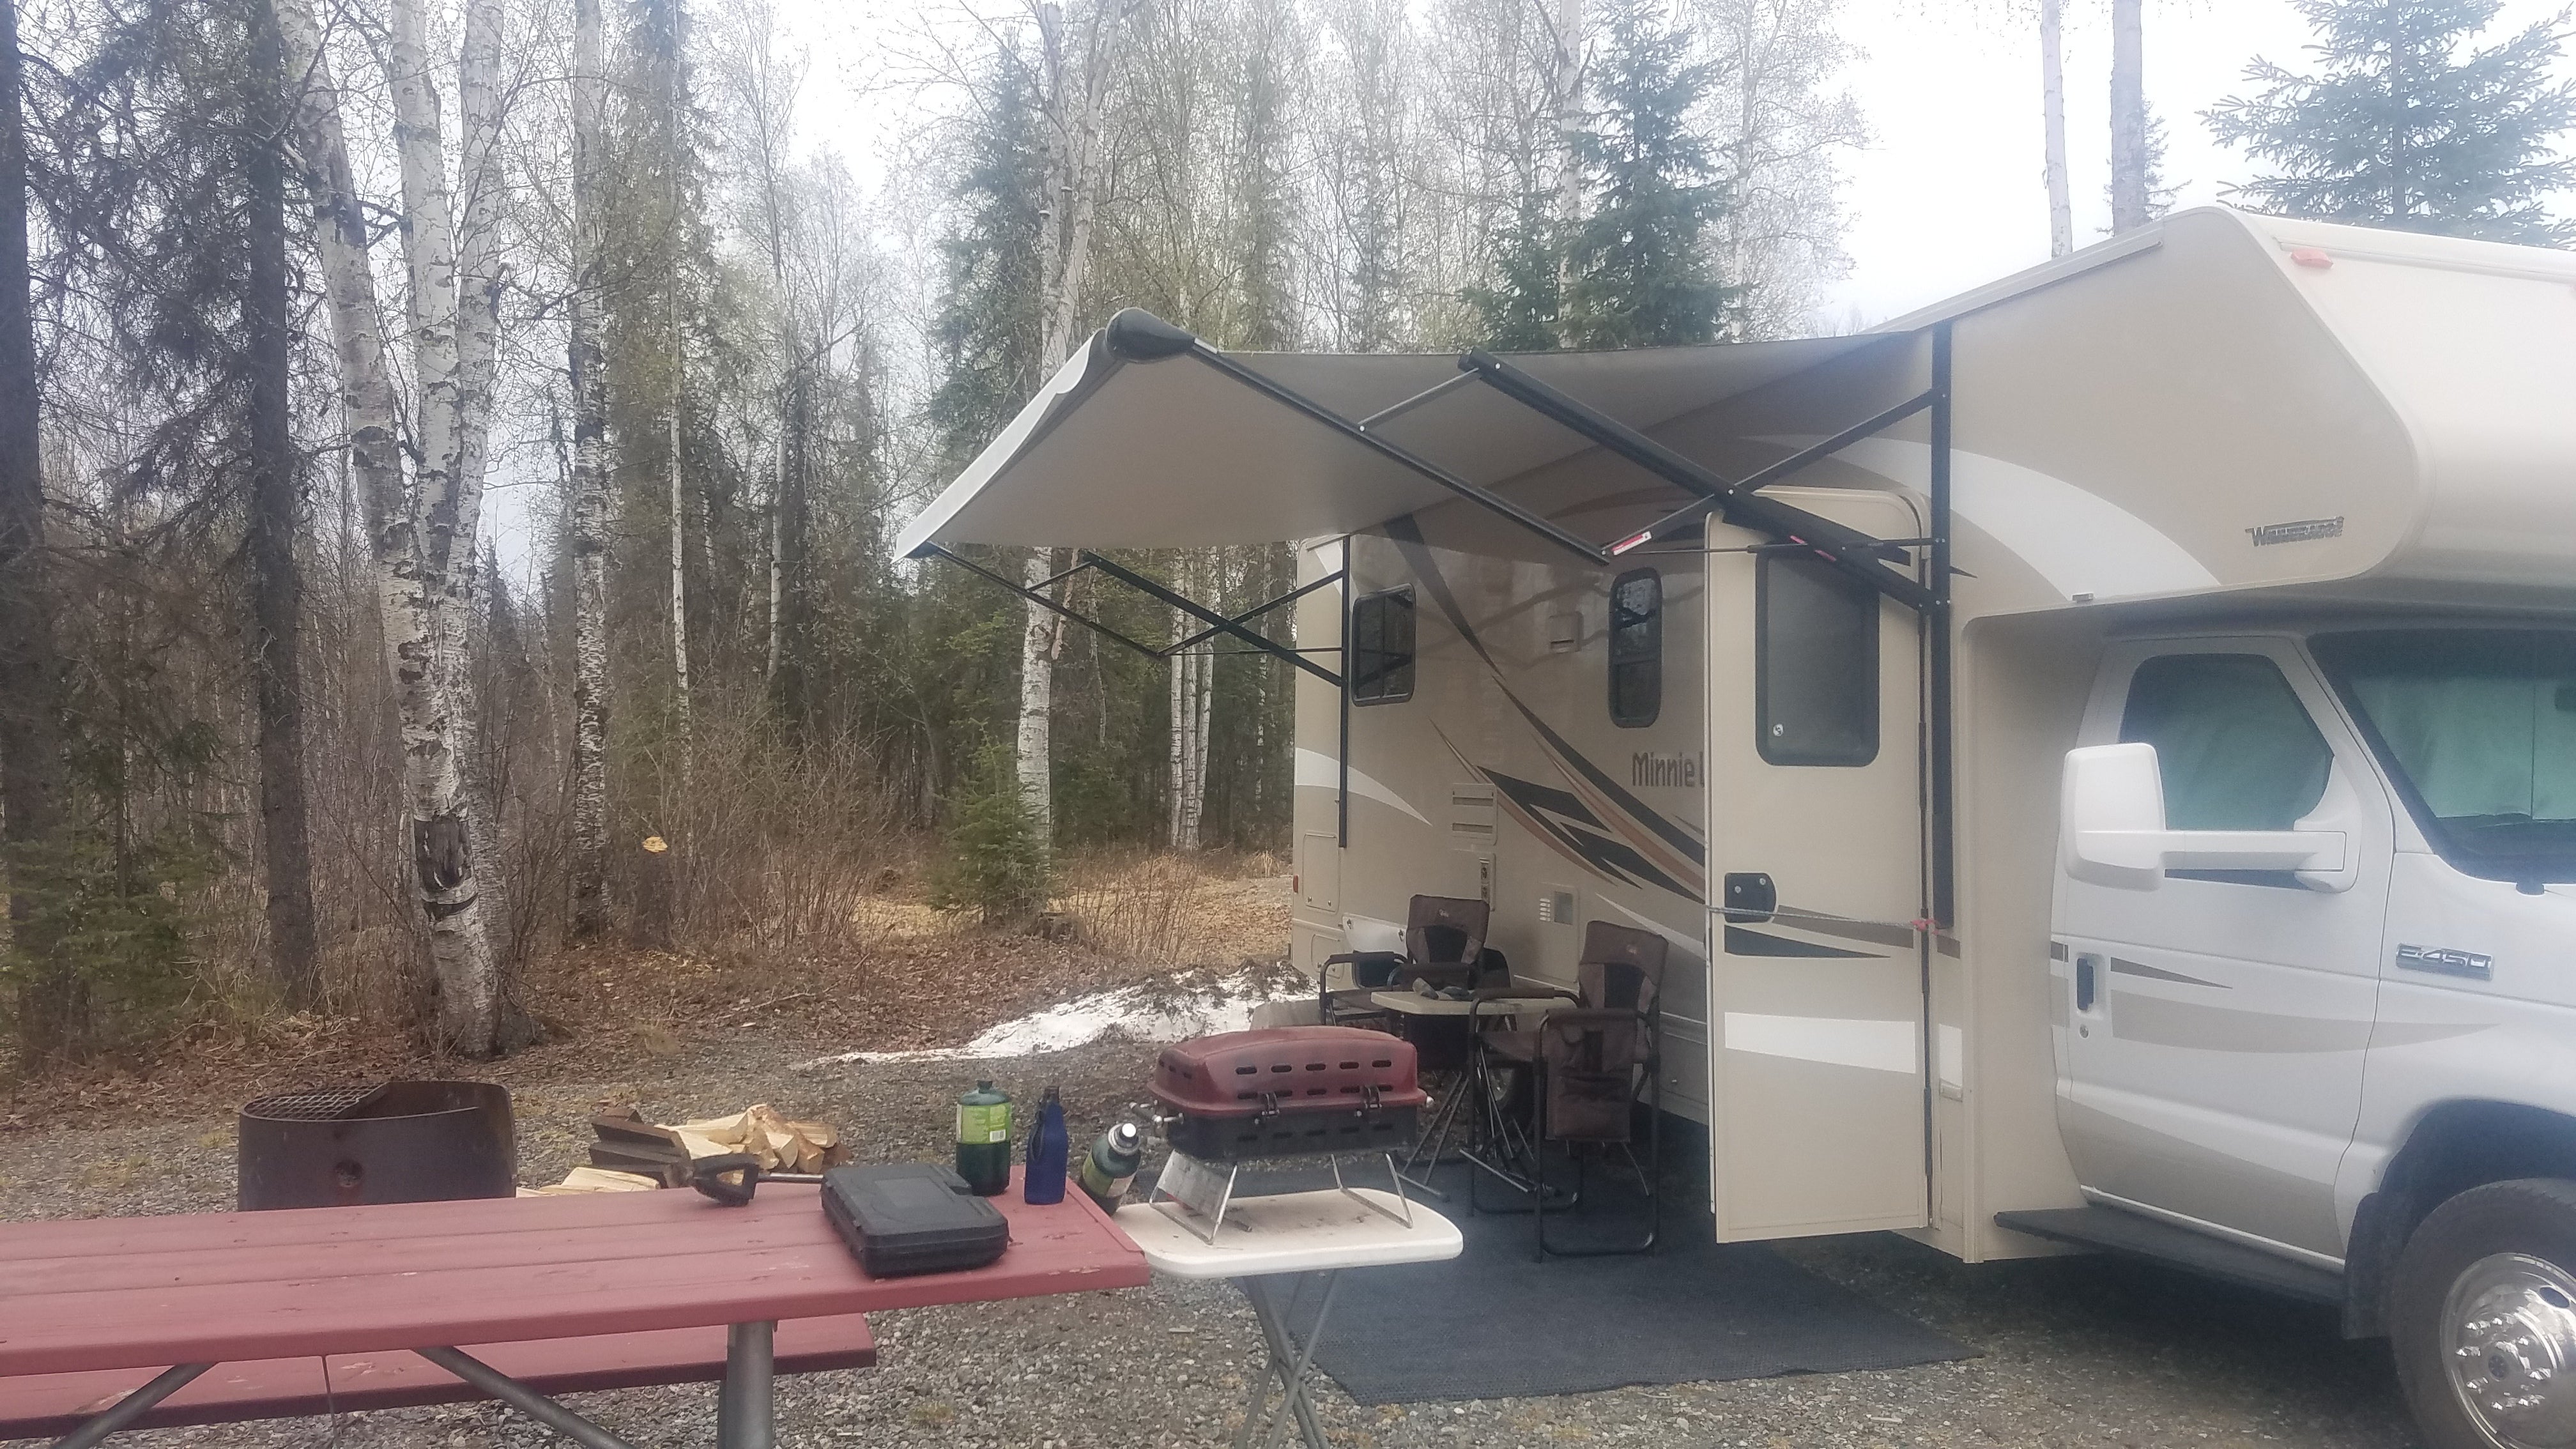 Site 39 all set up. May 10th trip